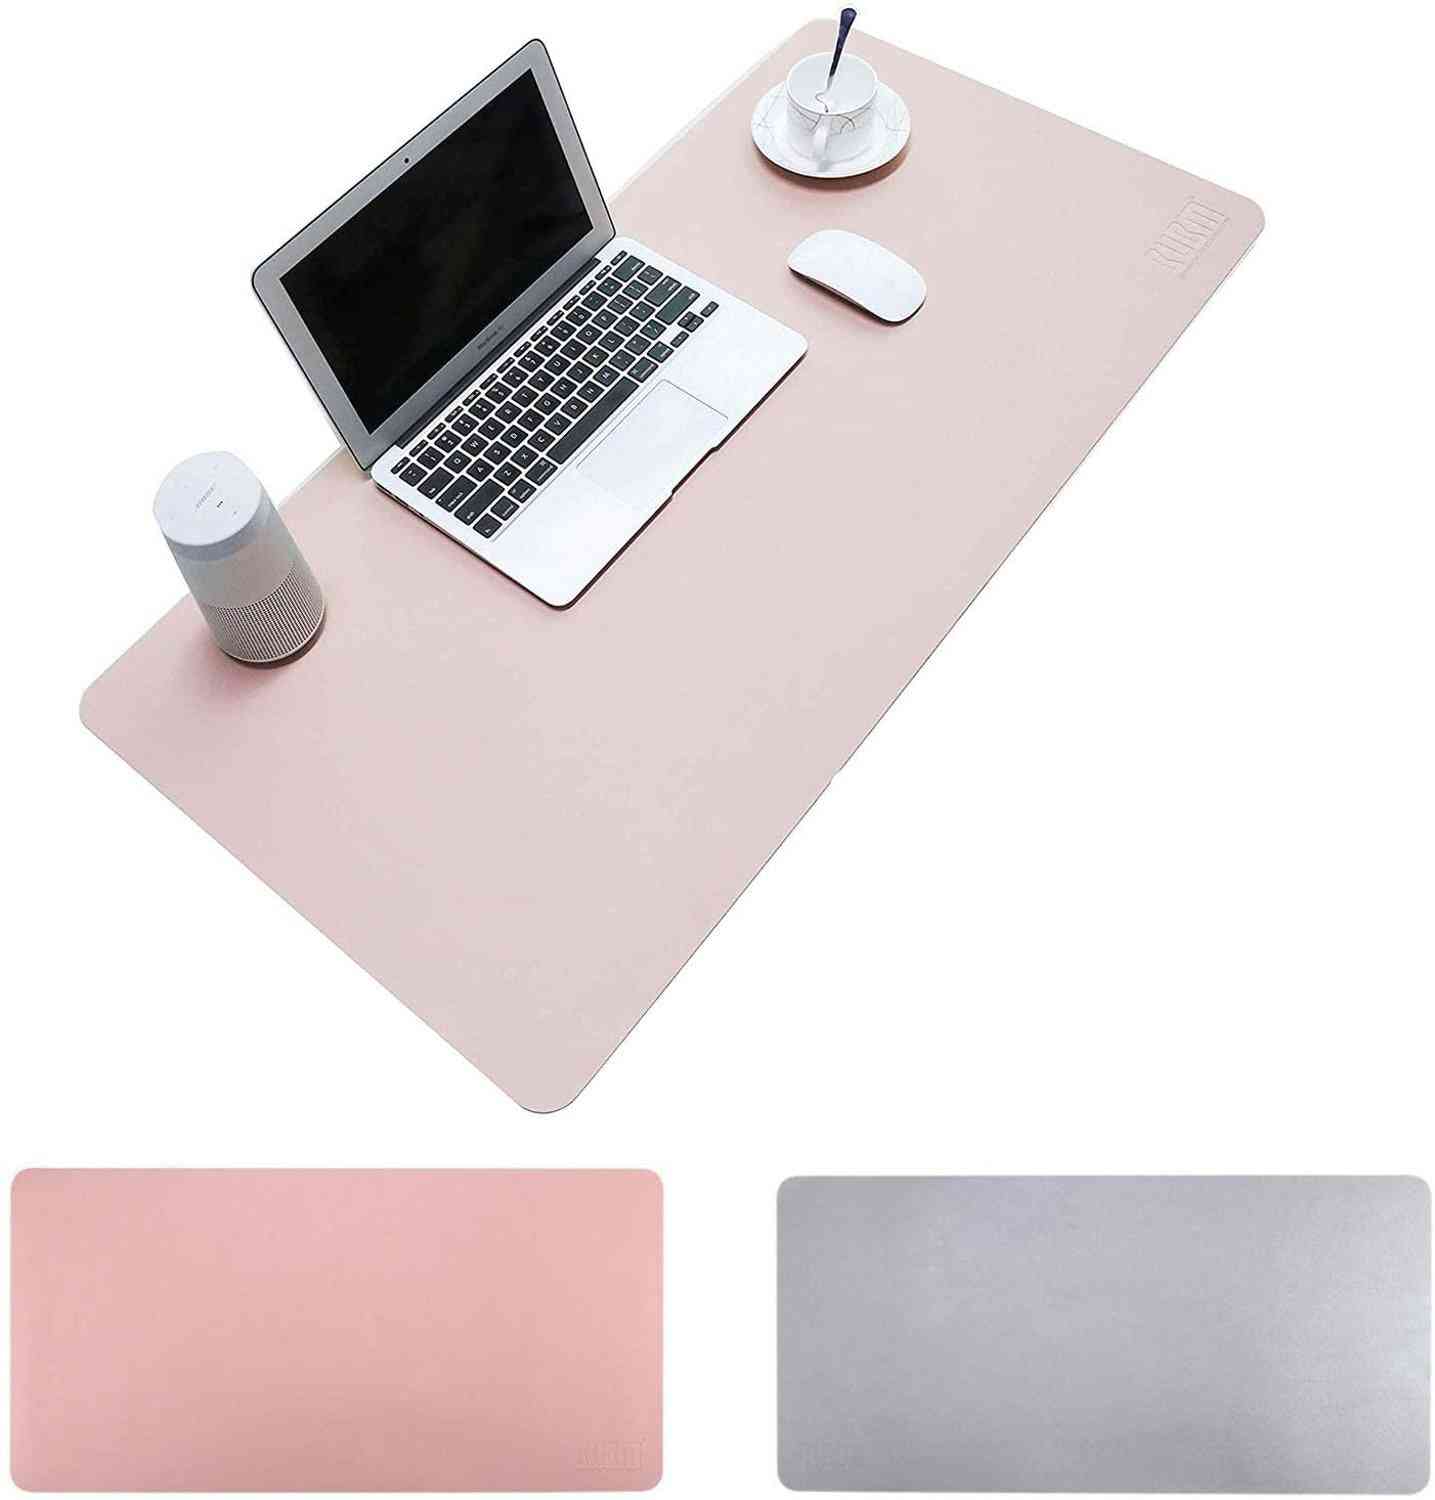 Desk Blotters Mouse Pad Organizer, Protector